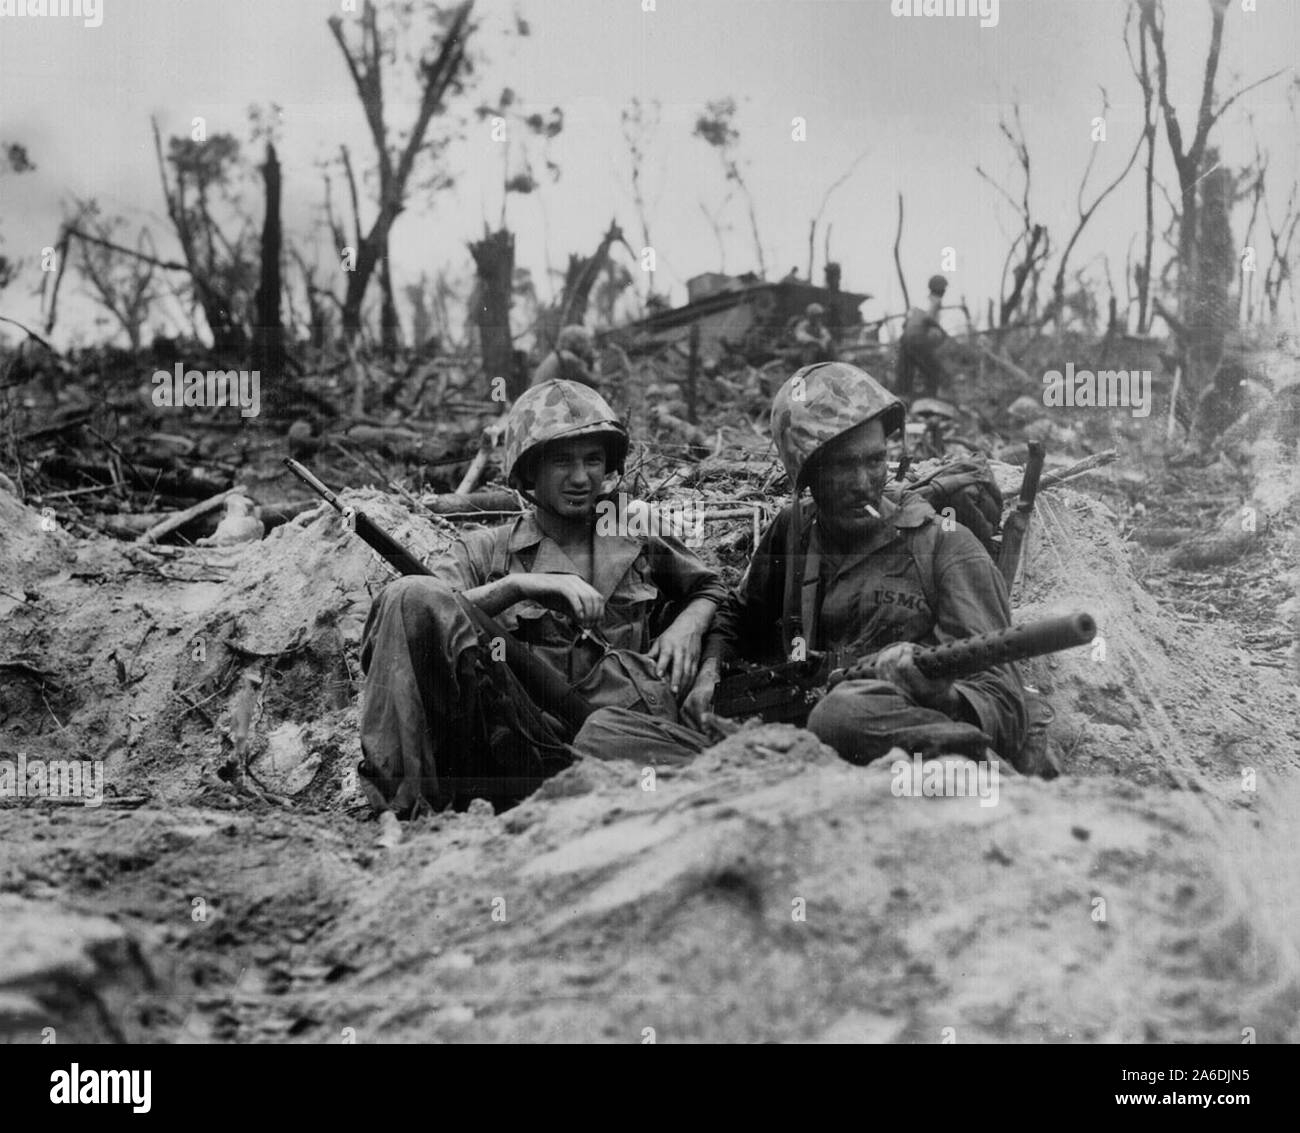 Marine Pfc. Douglas Lightheart (right) cradles his 30-caliber machine gun in his lap, while he and his buddy Pfc. Gerald Churchby take time out for a cigarette, while mopping up the enemy on Peleliu Island Stock Photo